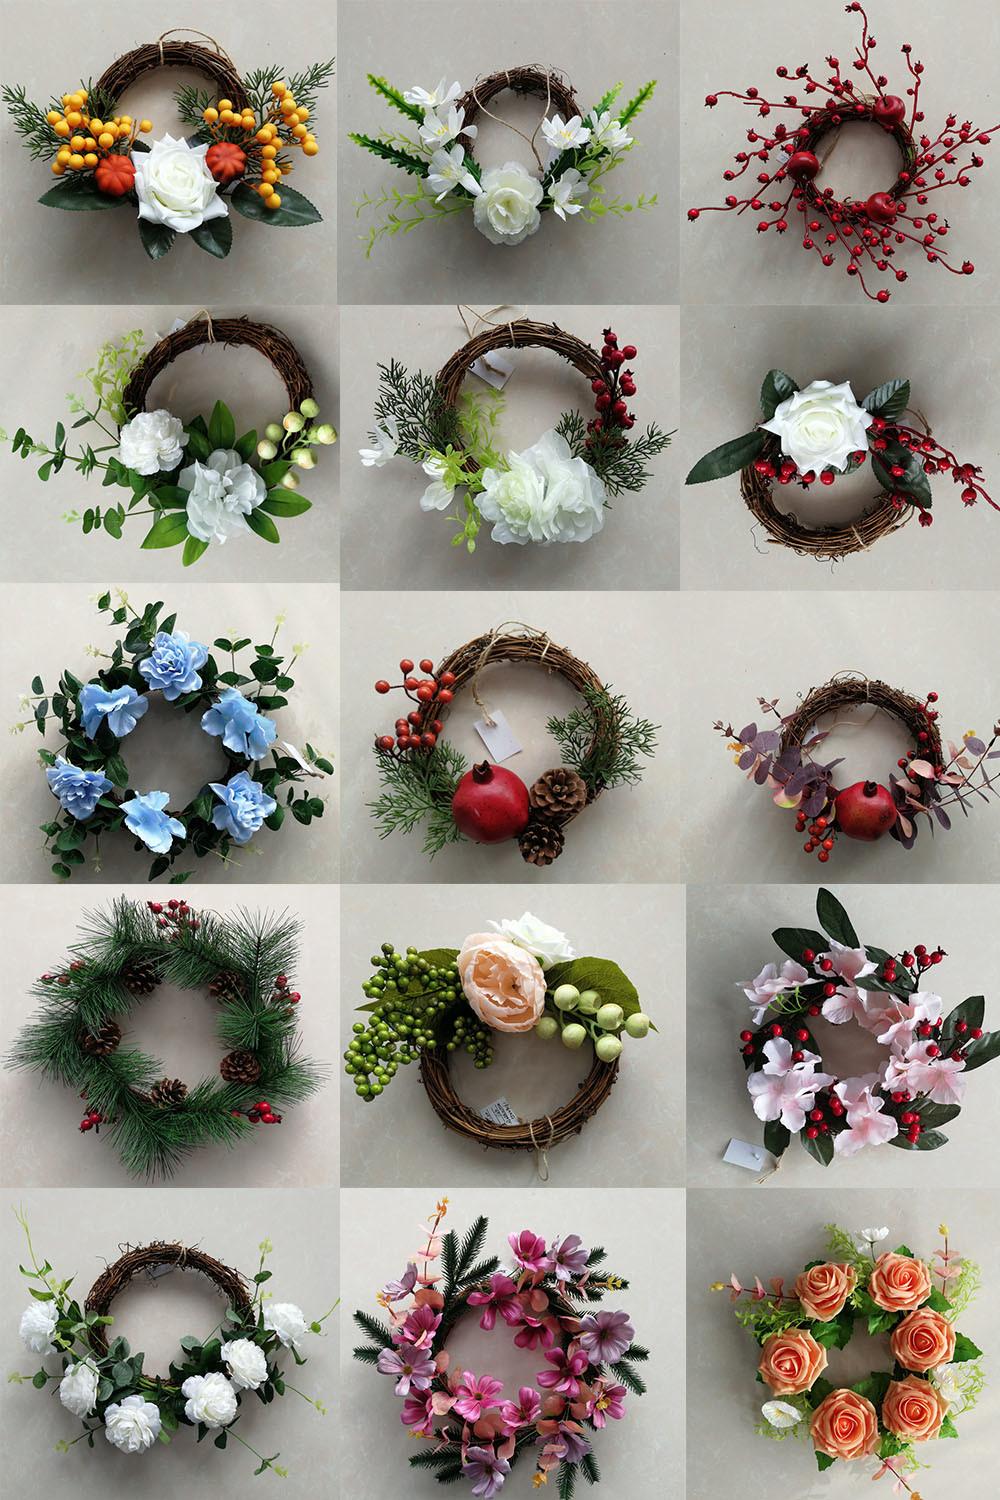 24inch Wreath with Cotton and Red Berry Gift Christmas Decoration Wreath